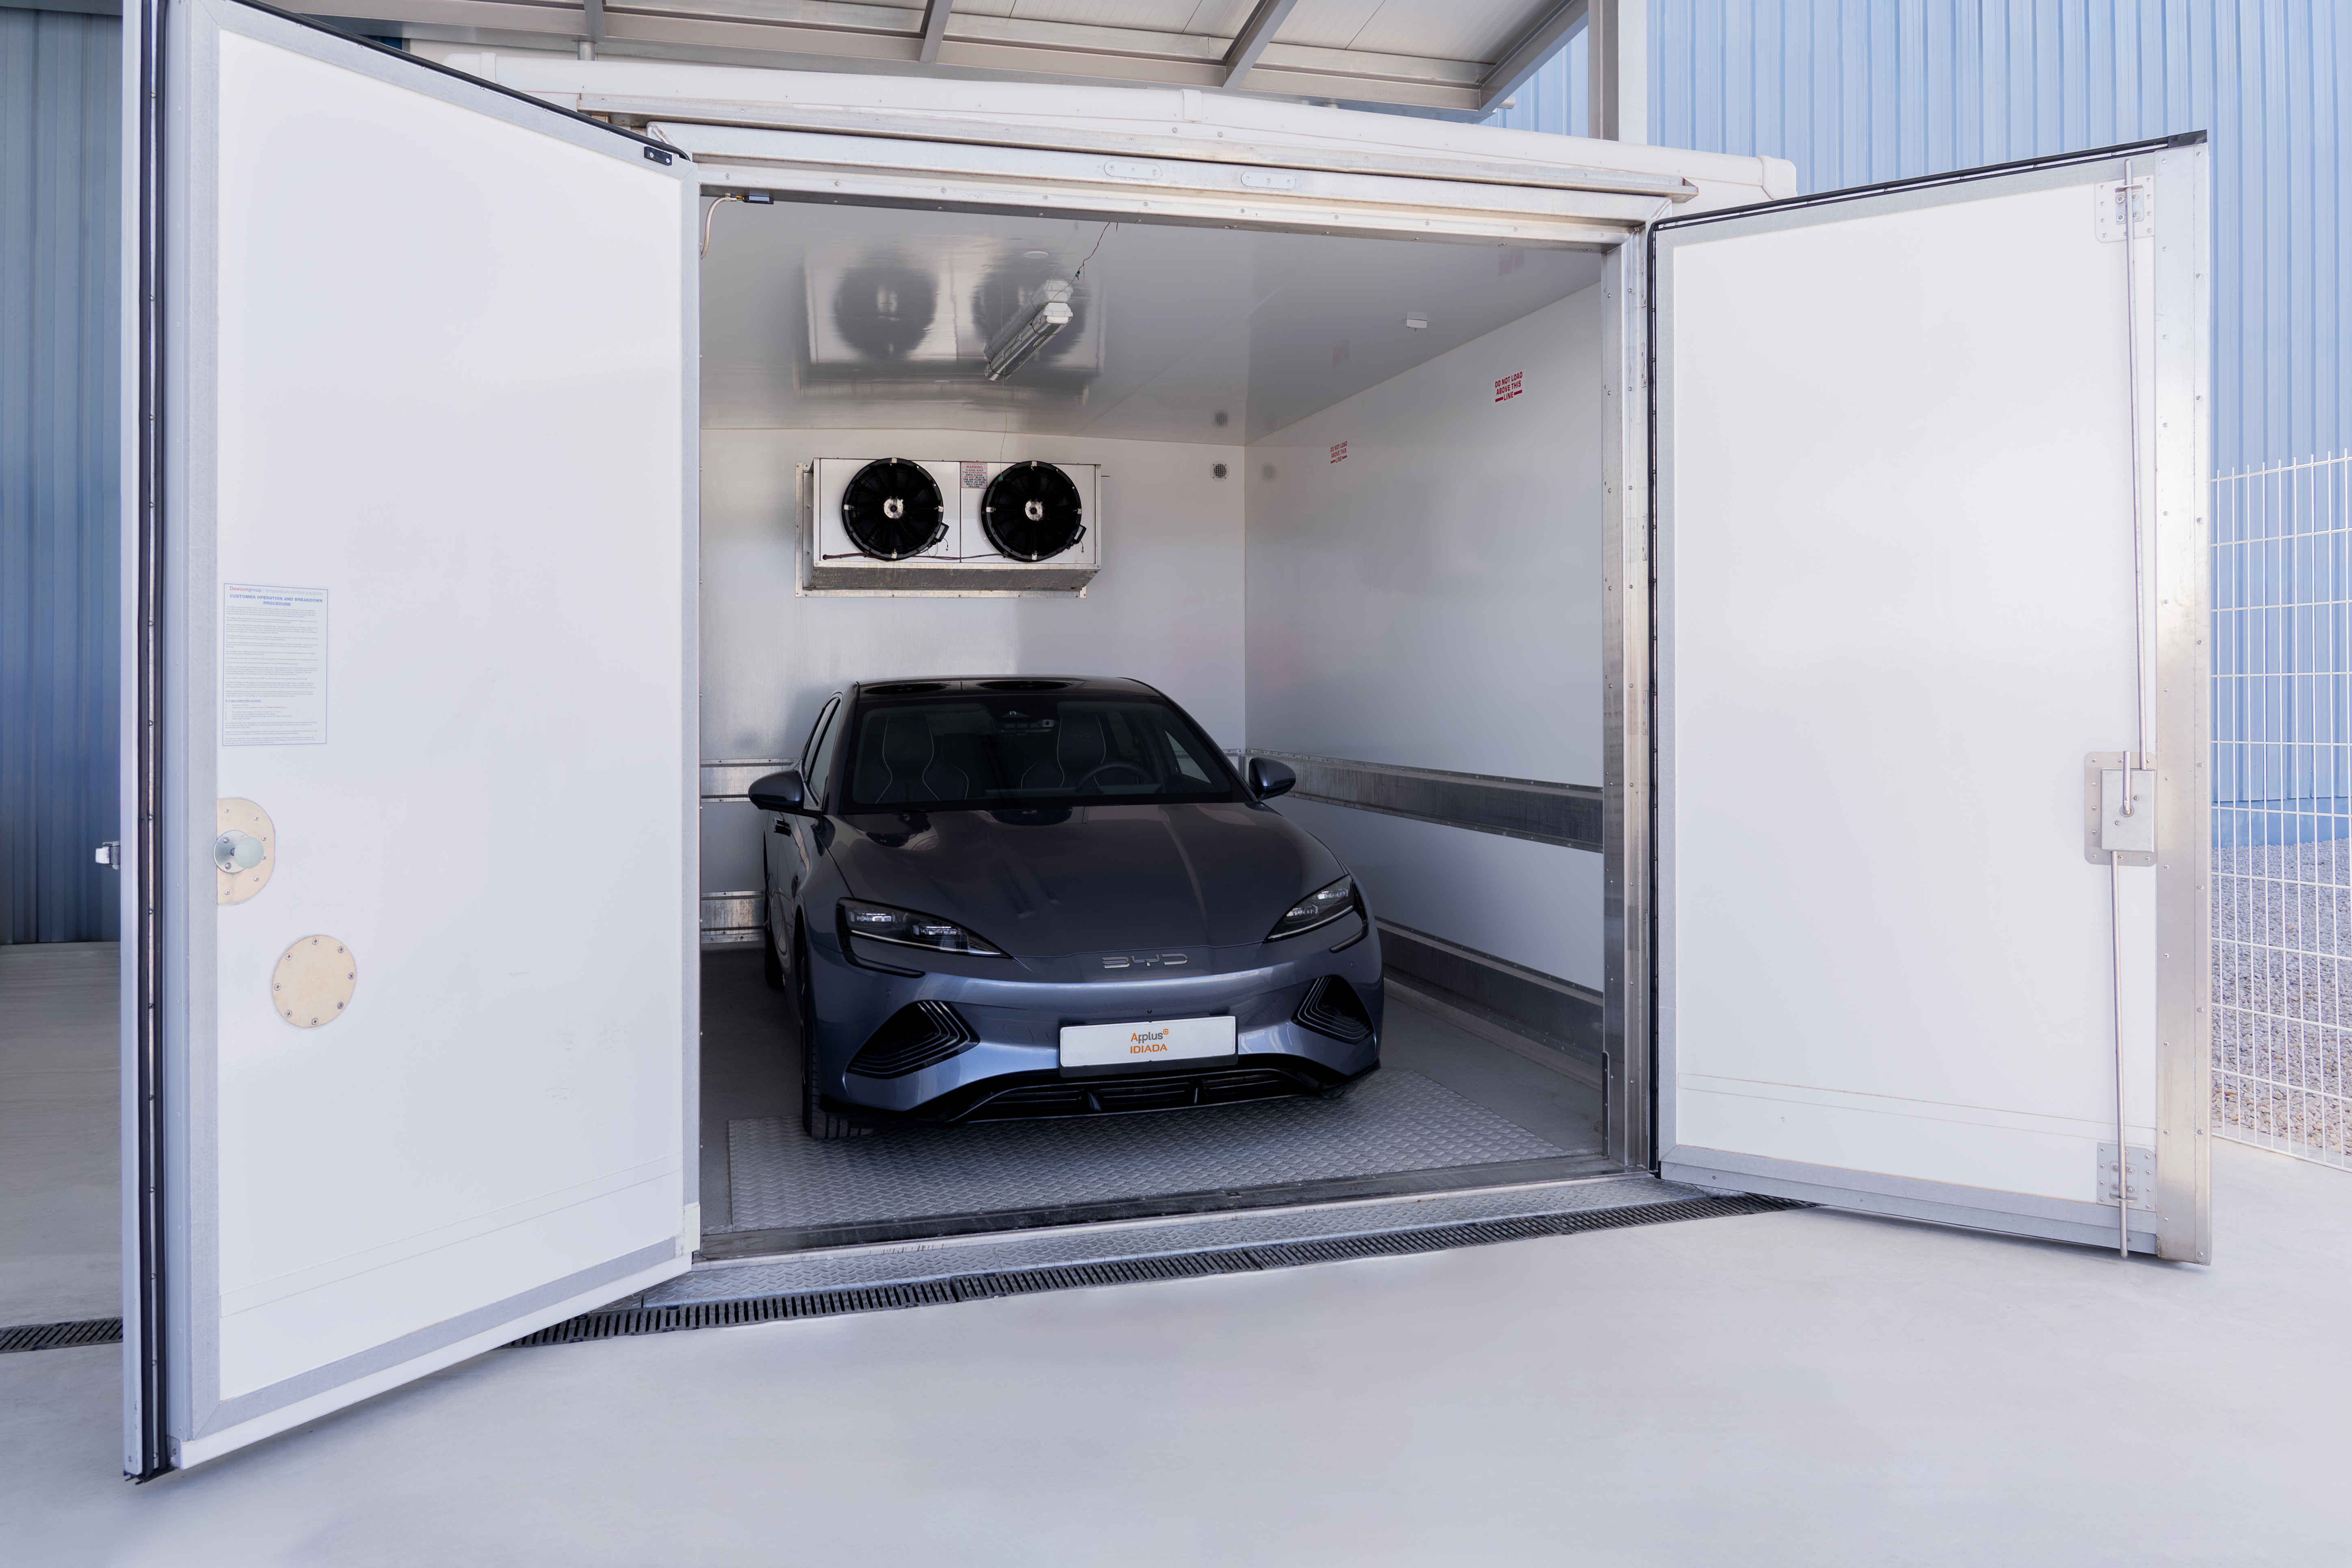 Charging Systems development and testing. our climatic chamber allows us to conduct charging performance tests under specific temperature conditions